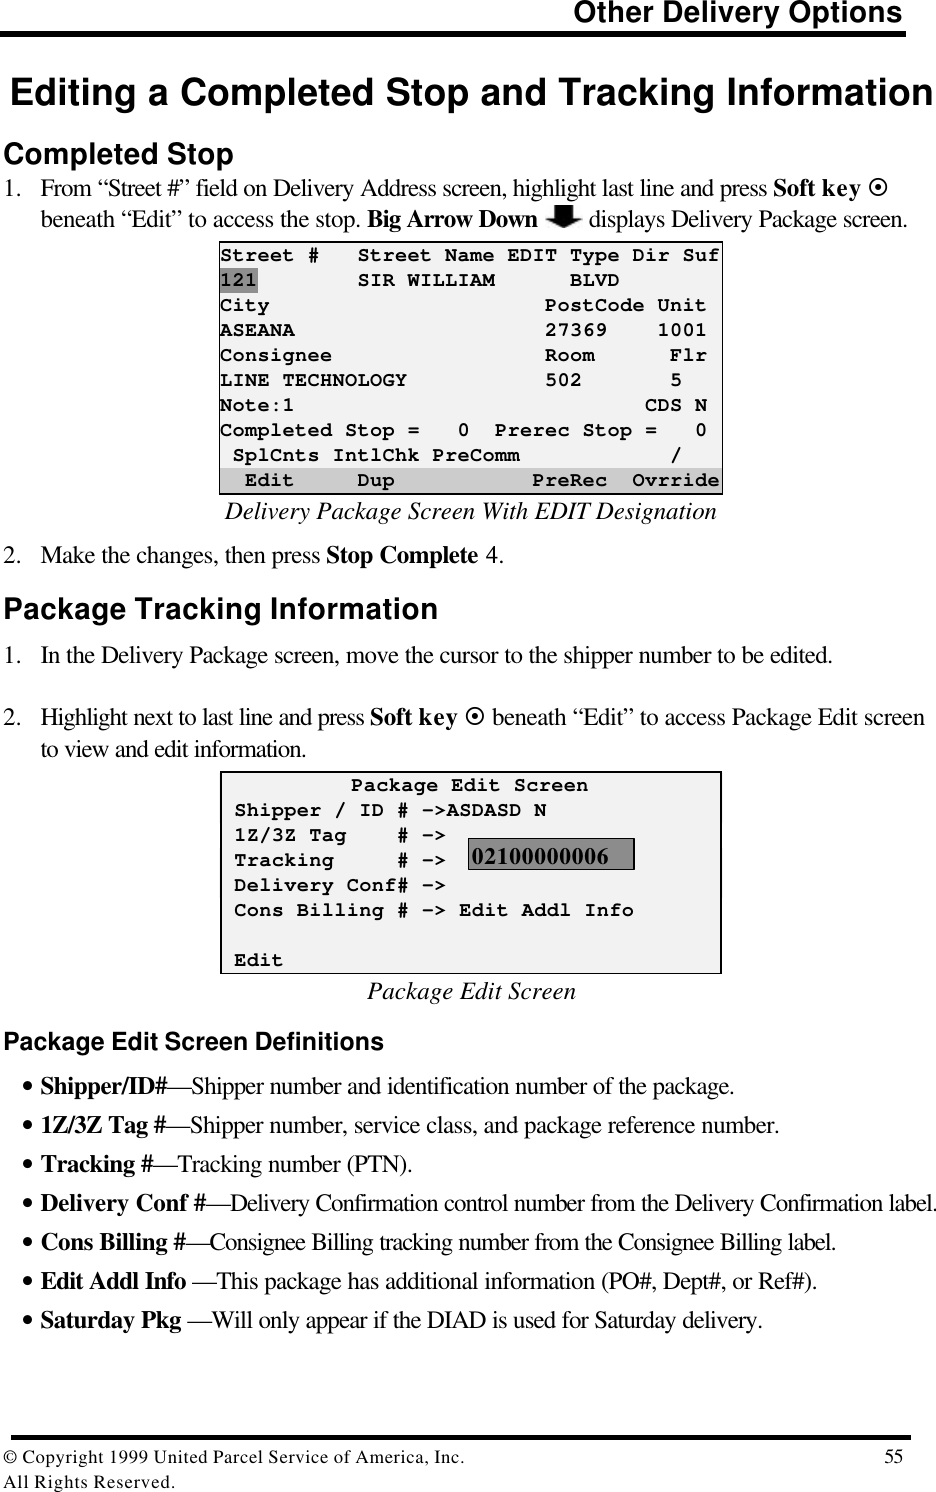                                                                          Other Delivery Options© Copyright 1999 United Parcel Service of America, Inc.  55All Rights Reserved.Editing a Completed Stop and Tracking InformationCompleted Stop1. From “Street #” field on Delivery Address screen, highlight last line and press Soft key ¤beneath “Edit” to access the stop. Big Arrow Down  displays Delivery Package screen.Street #   Street Name EDIT Type Dir Suf121        SIR WILLIAM      BLVDCity                      PostCode UnitASEANA                    27369    1001Consignee                 Room      FlrLINE TECHNOLOGY           502       5Note:1                            CDS NCompleted Stop =   0  Prerec Stop =   0 SplCnts IntlChk PreComm            /  Edit     Dup           PreRec  OvrrideDelivery Package Screen With EDIT Designation2. Make the changes, then press Stop Complete 4.Package Tracking Information1. In the Delivery Package screen, move the cursor to the shipper number to be edited.2. Highlight next to last line and press Soft key ¤ beneath “Edit” to access Package Edit screento view and edit information.Package Edit Screen Shipper / ID # -&gt;ASDASD N 1Z/3Z Tag    # -&gt; Tracking     # -&gt; Delivery Conf# -&gt; Cons Billing # -&gt; Edit Addl Info EditPackage Edit ScreenPackage Edit Screen Definitions• Shipper/ID#—Shipper number and identification number of the package.• 1Z/3Z Tag #—Shipper number, service class, and package reference number.• Tracking #—Tracking number (PTN).• Delivery Conf #—Delivery Confirmation control number from the Delivery Confirmation label.• Cons Billing #—Consignee Billing tracking number from the Consignee Billing label.• Edit Addl Info —This package has additional information (PO#, Dept#, or Ref#).• Saturday Pkg —Will only appear if the DIAD is used for Saturday delivery.02100000006